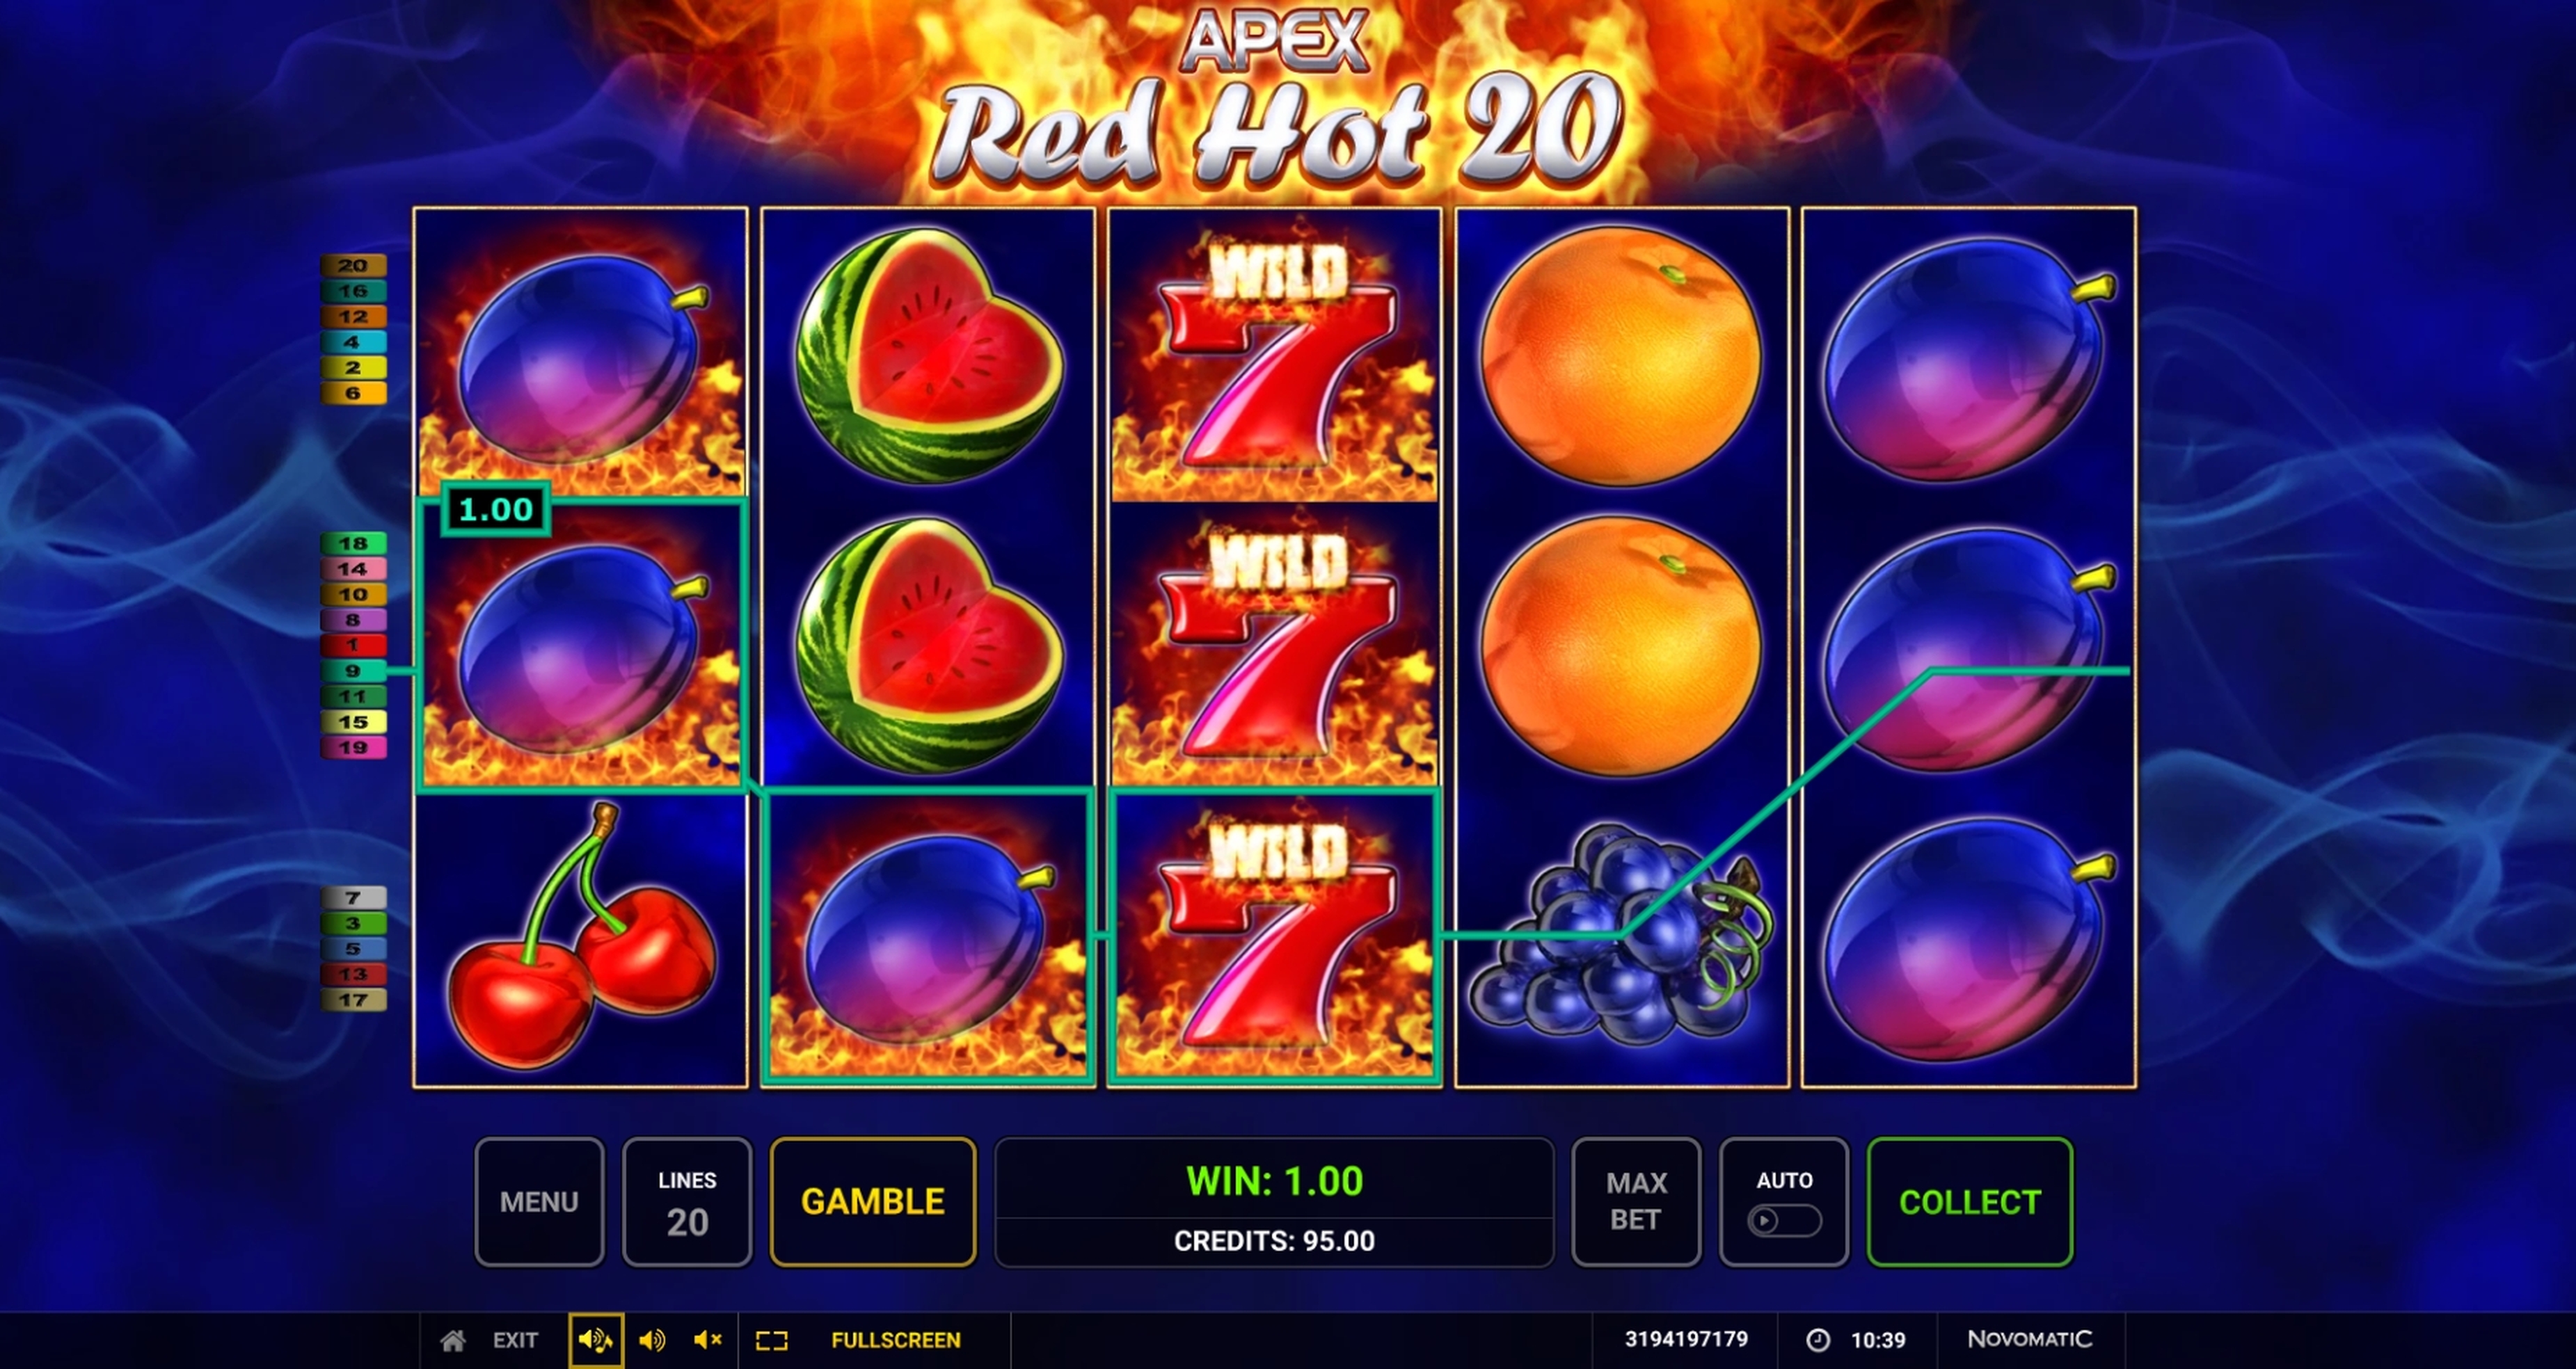 Win Money in Red Hot 20 Free Slot Game by Apex Gaming